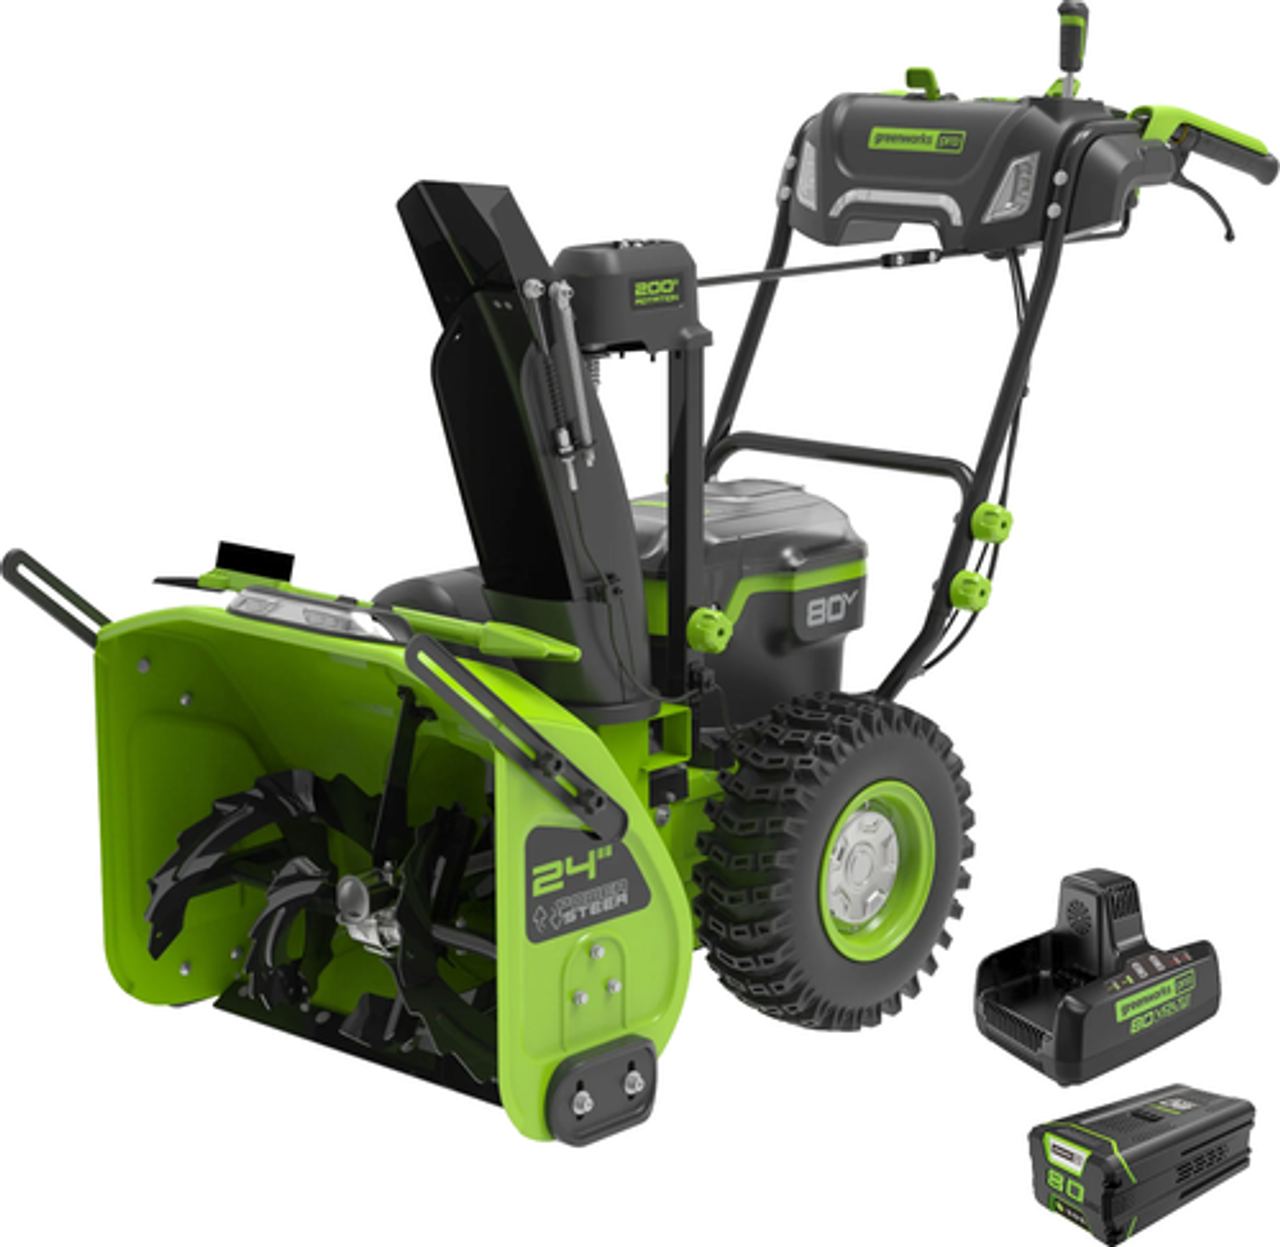 Greenworks - 24 in. Pro 80-Volt Cordless Brushless Two Stage Snow Blower (2 x 4.0 AH Batteries and Charger Included) - Direct Import - Green